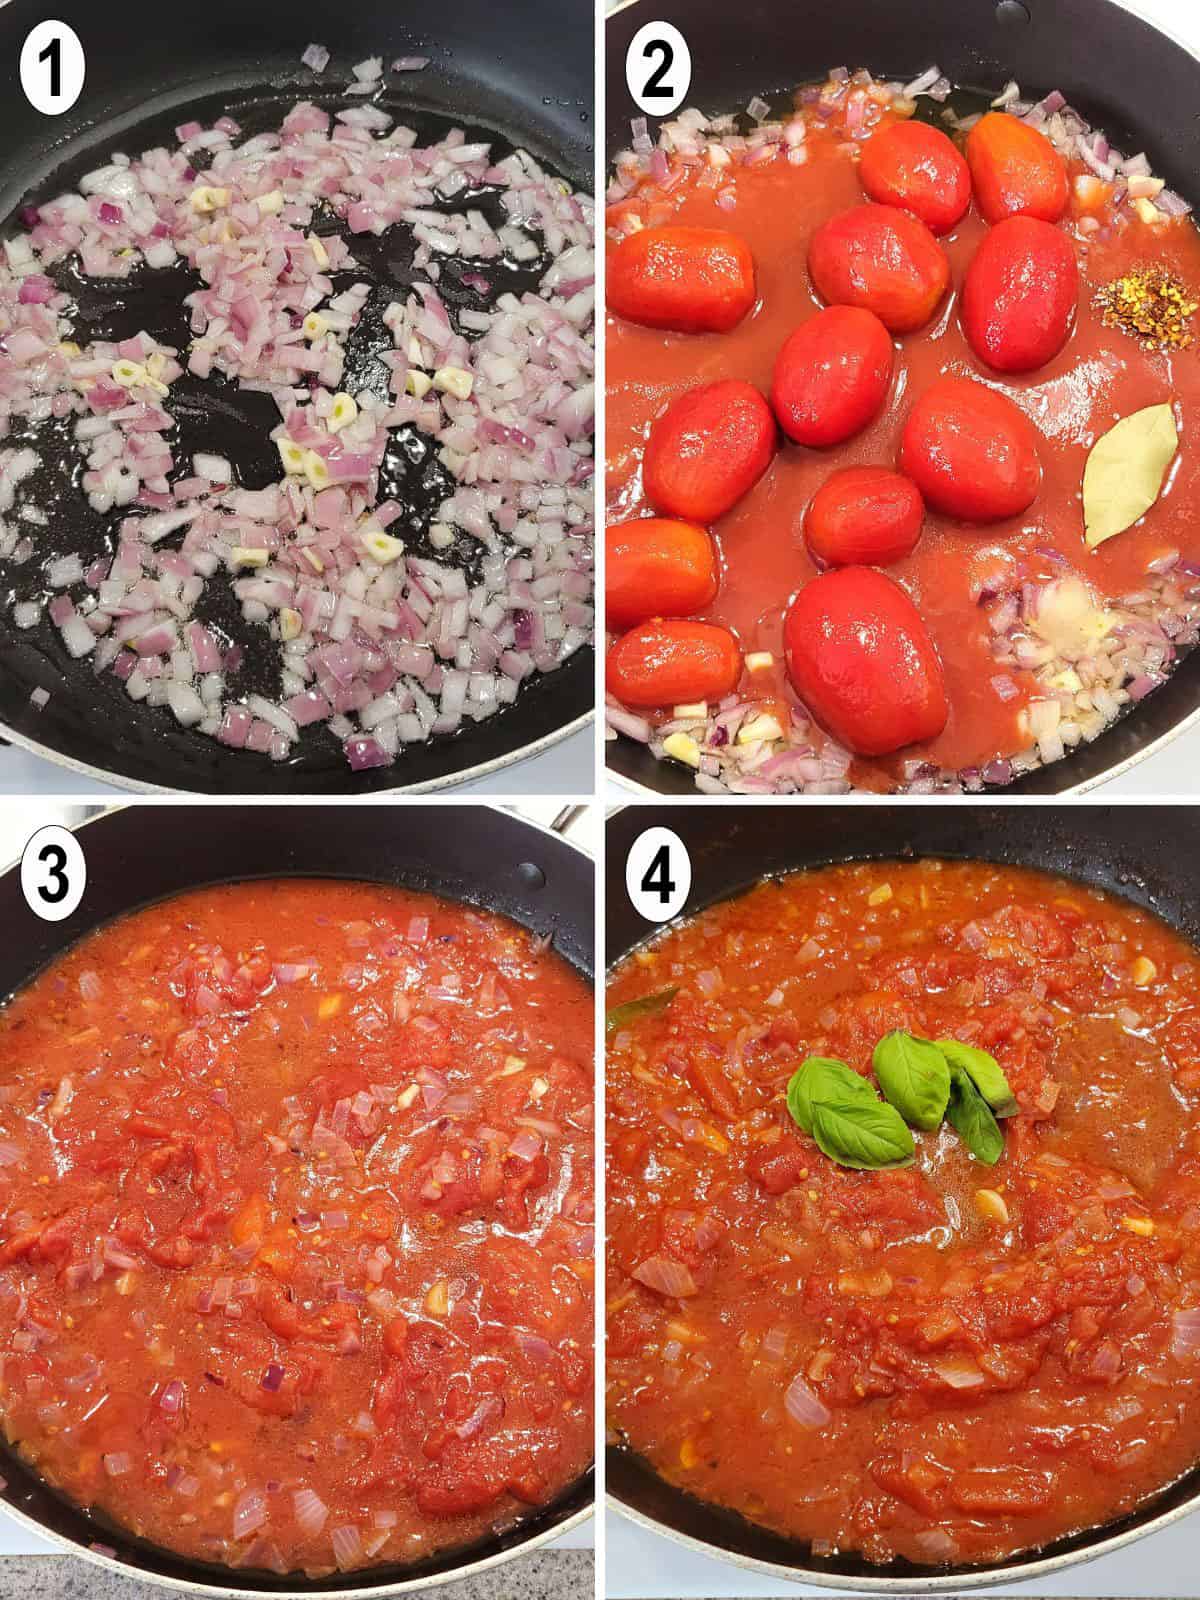 sauce process collage. onions and garlic. tomatoes and spices. basil added.